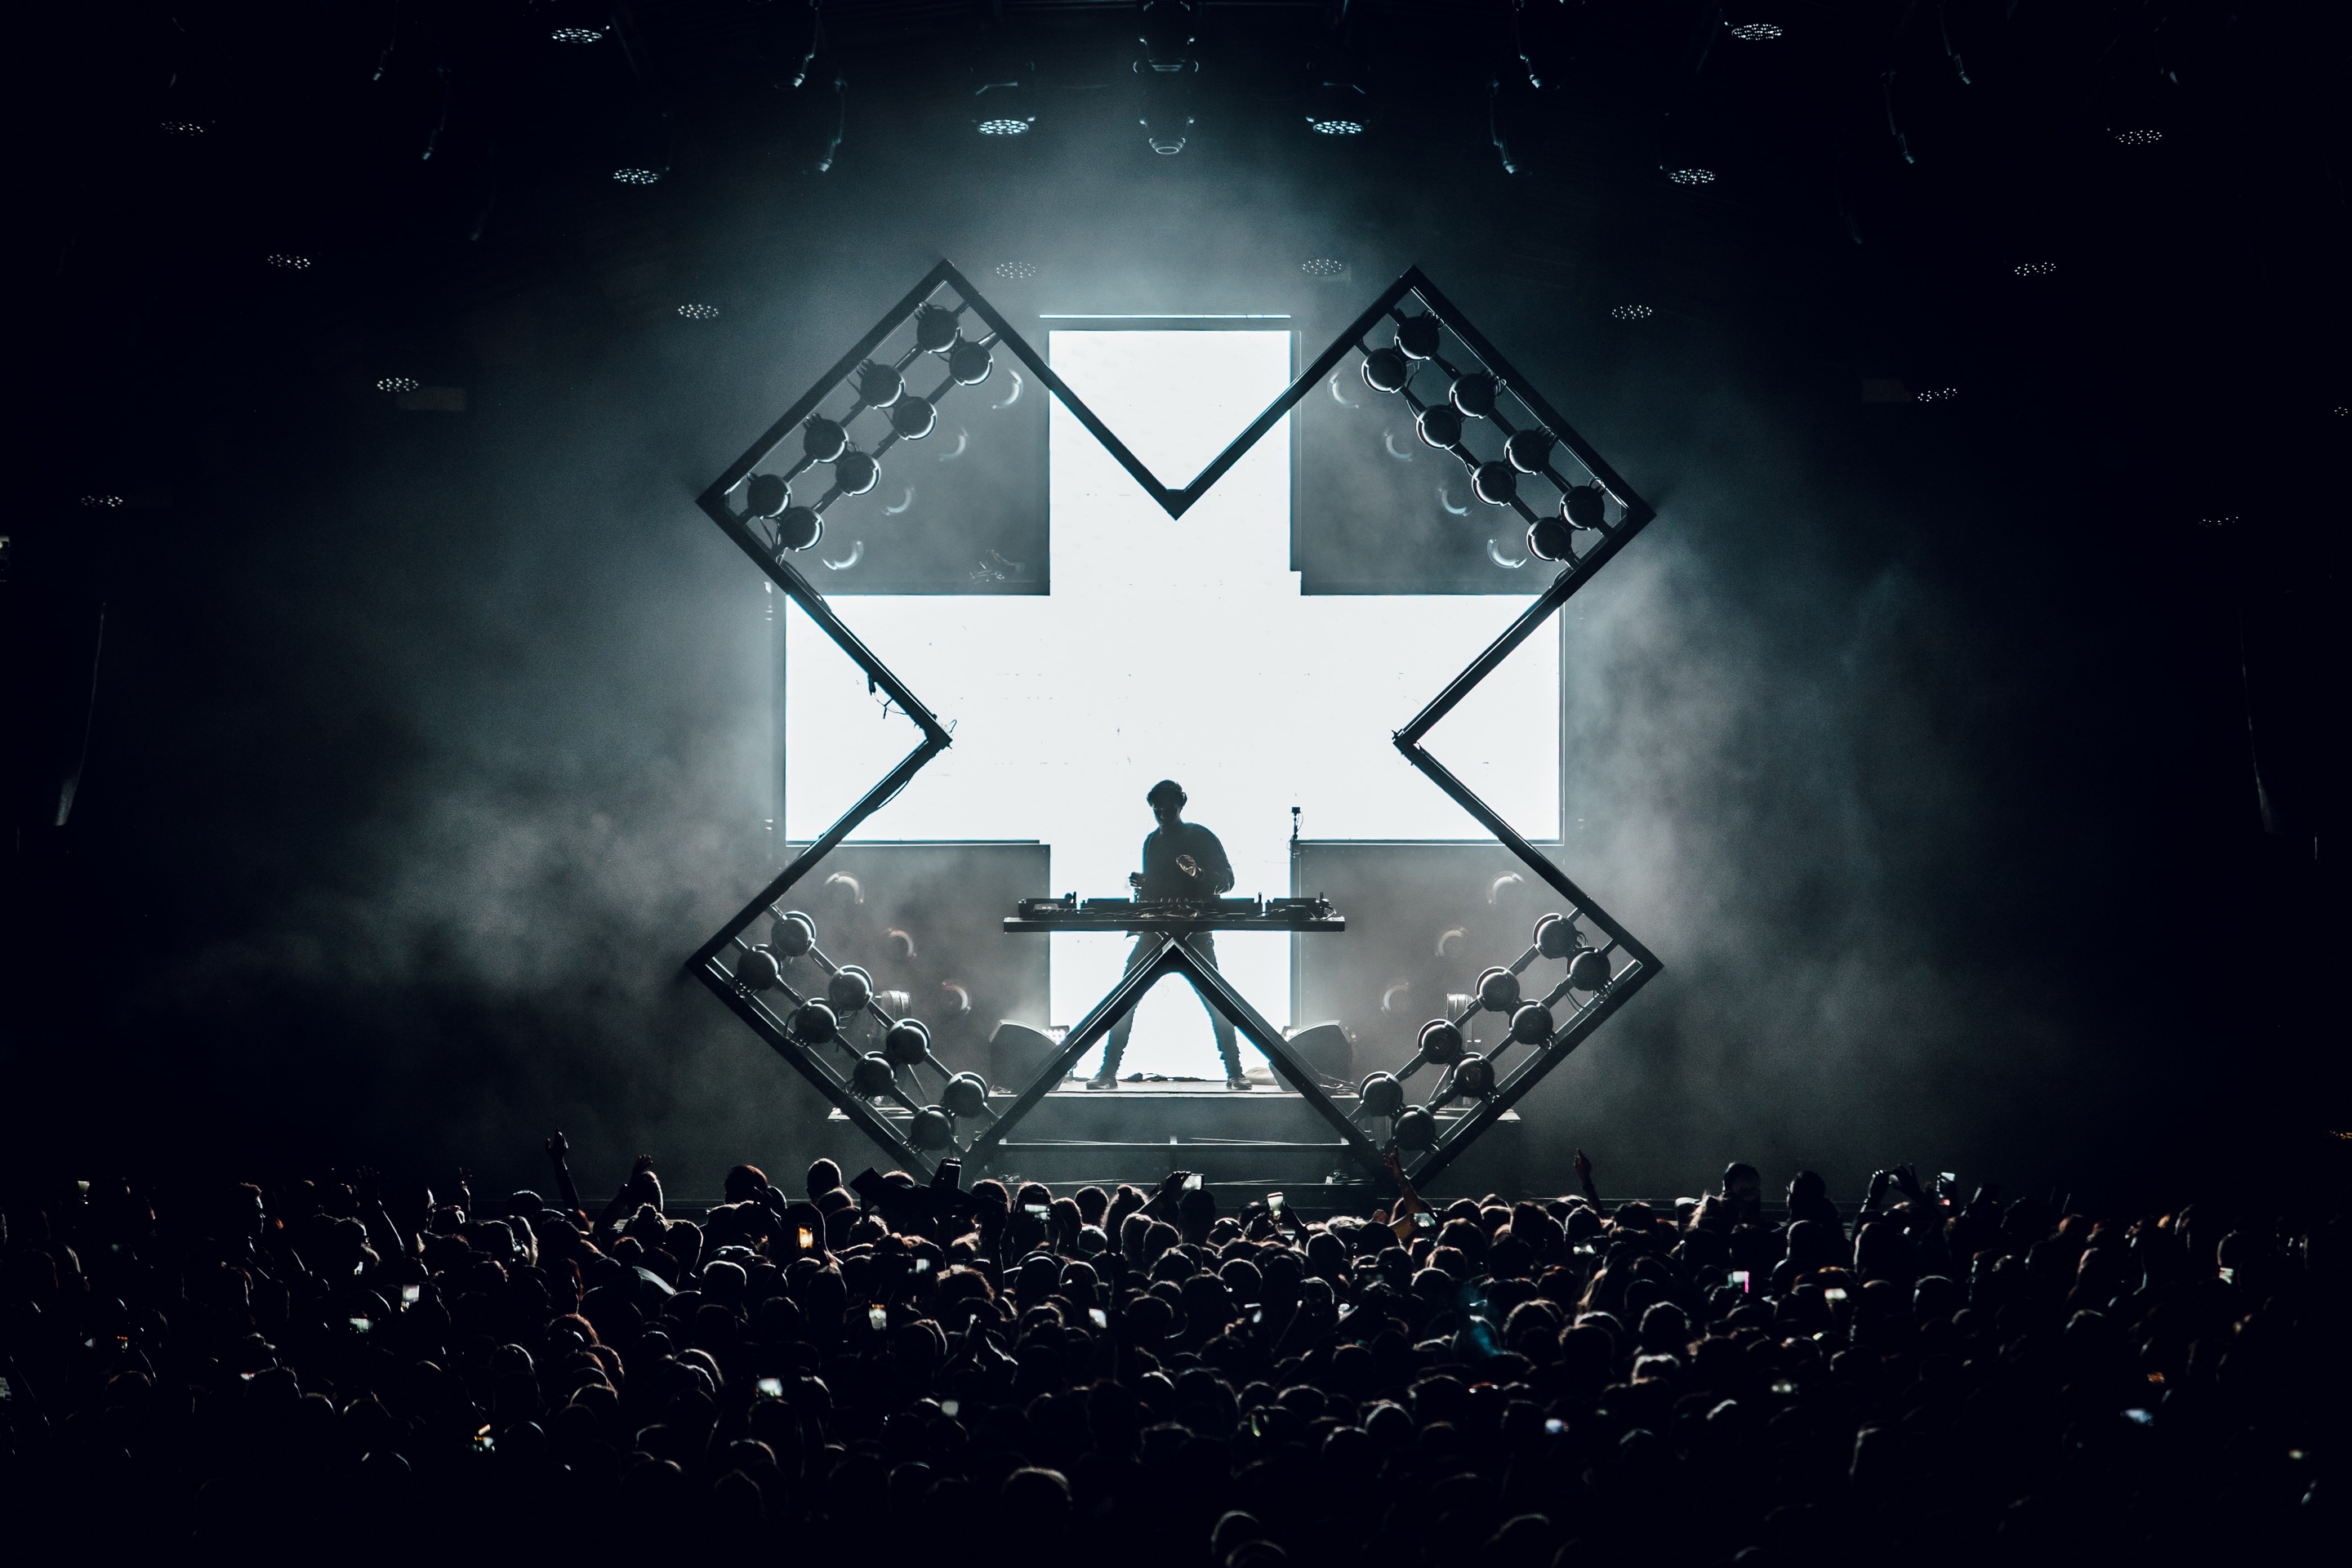 Martin Garrix during one of the previous shows